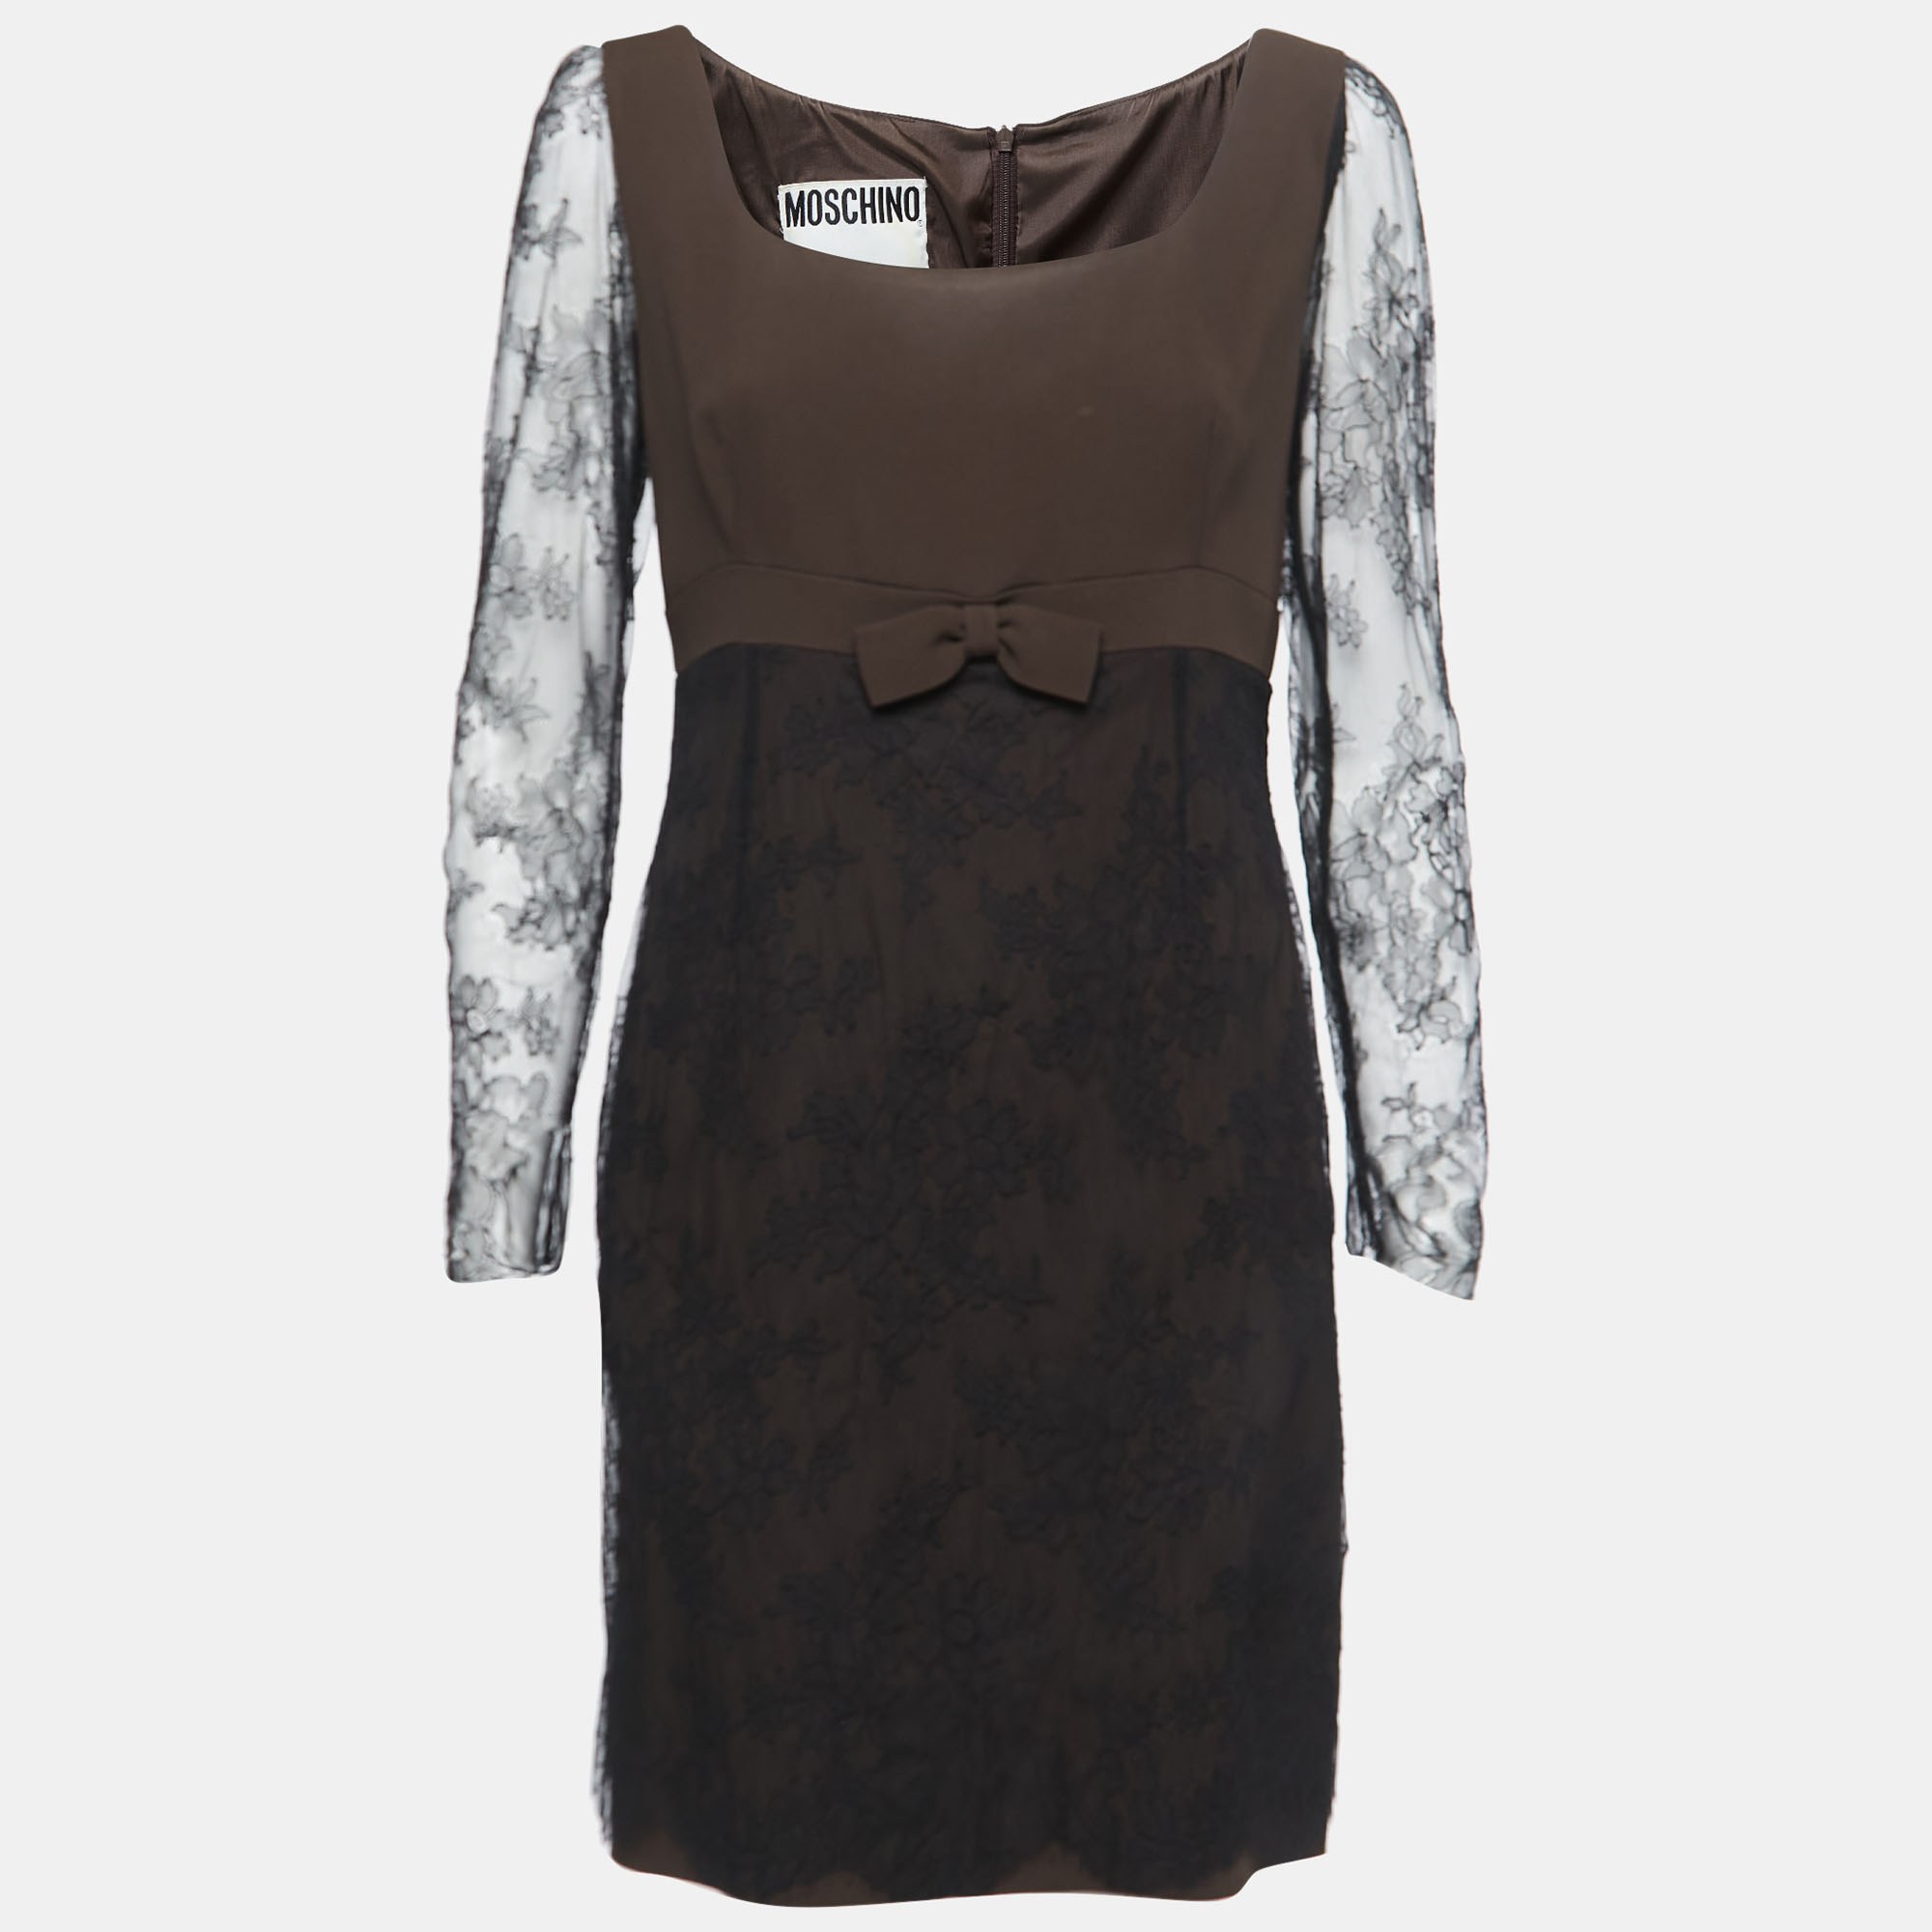 

Moschino Couture Black/Brown Crepe & Lace Bow Detail Mini Dress L